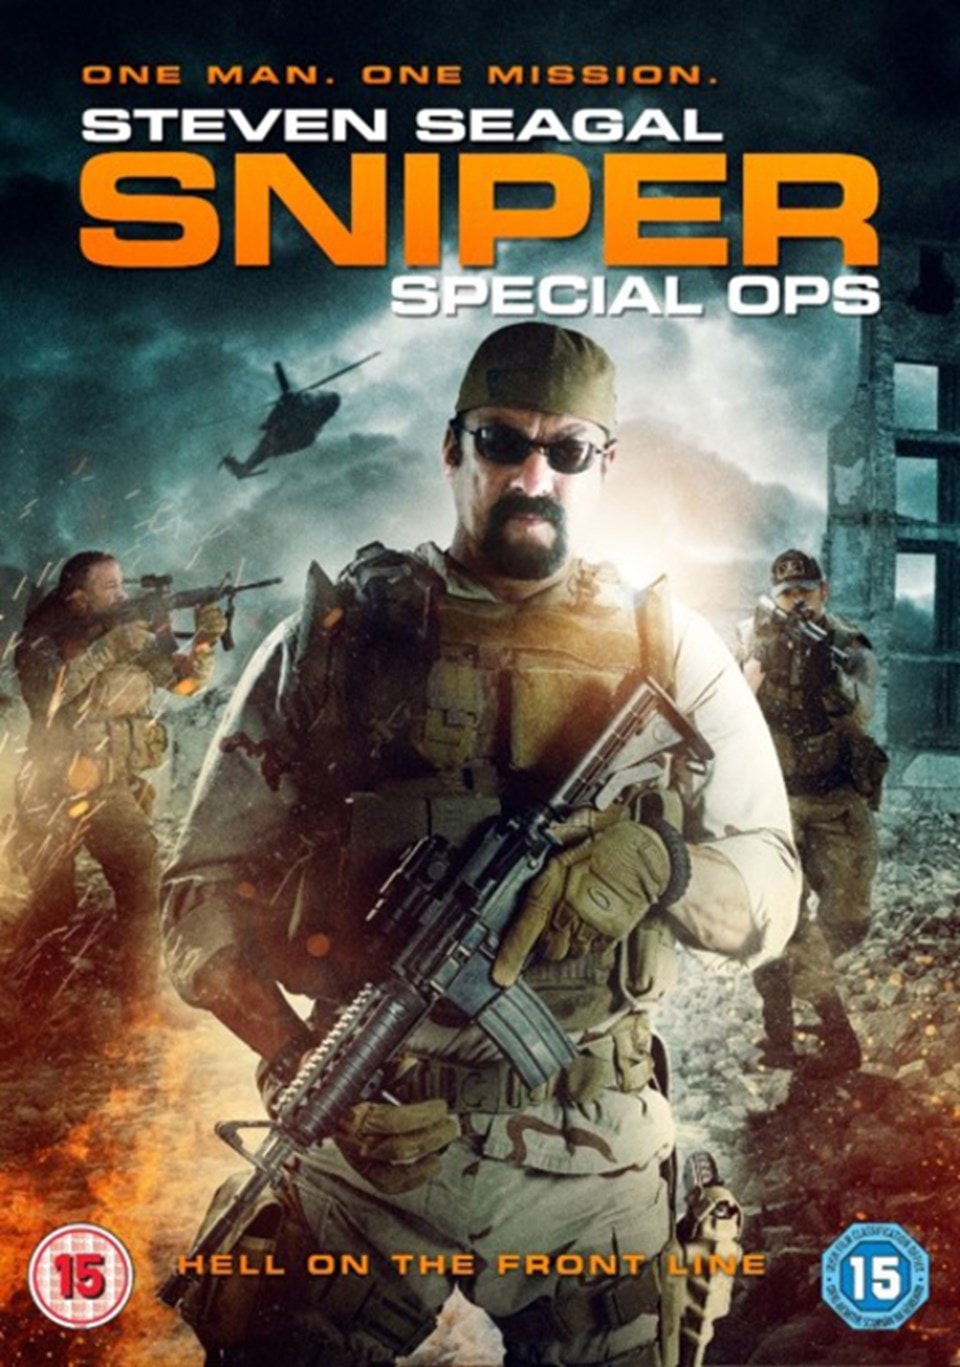 Sniper Ops Shooting download the last version for ios